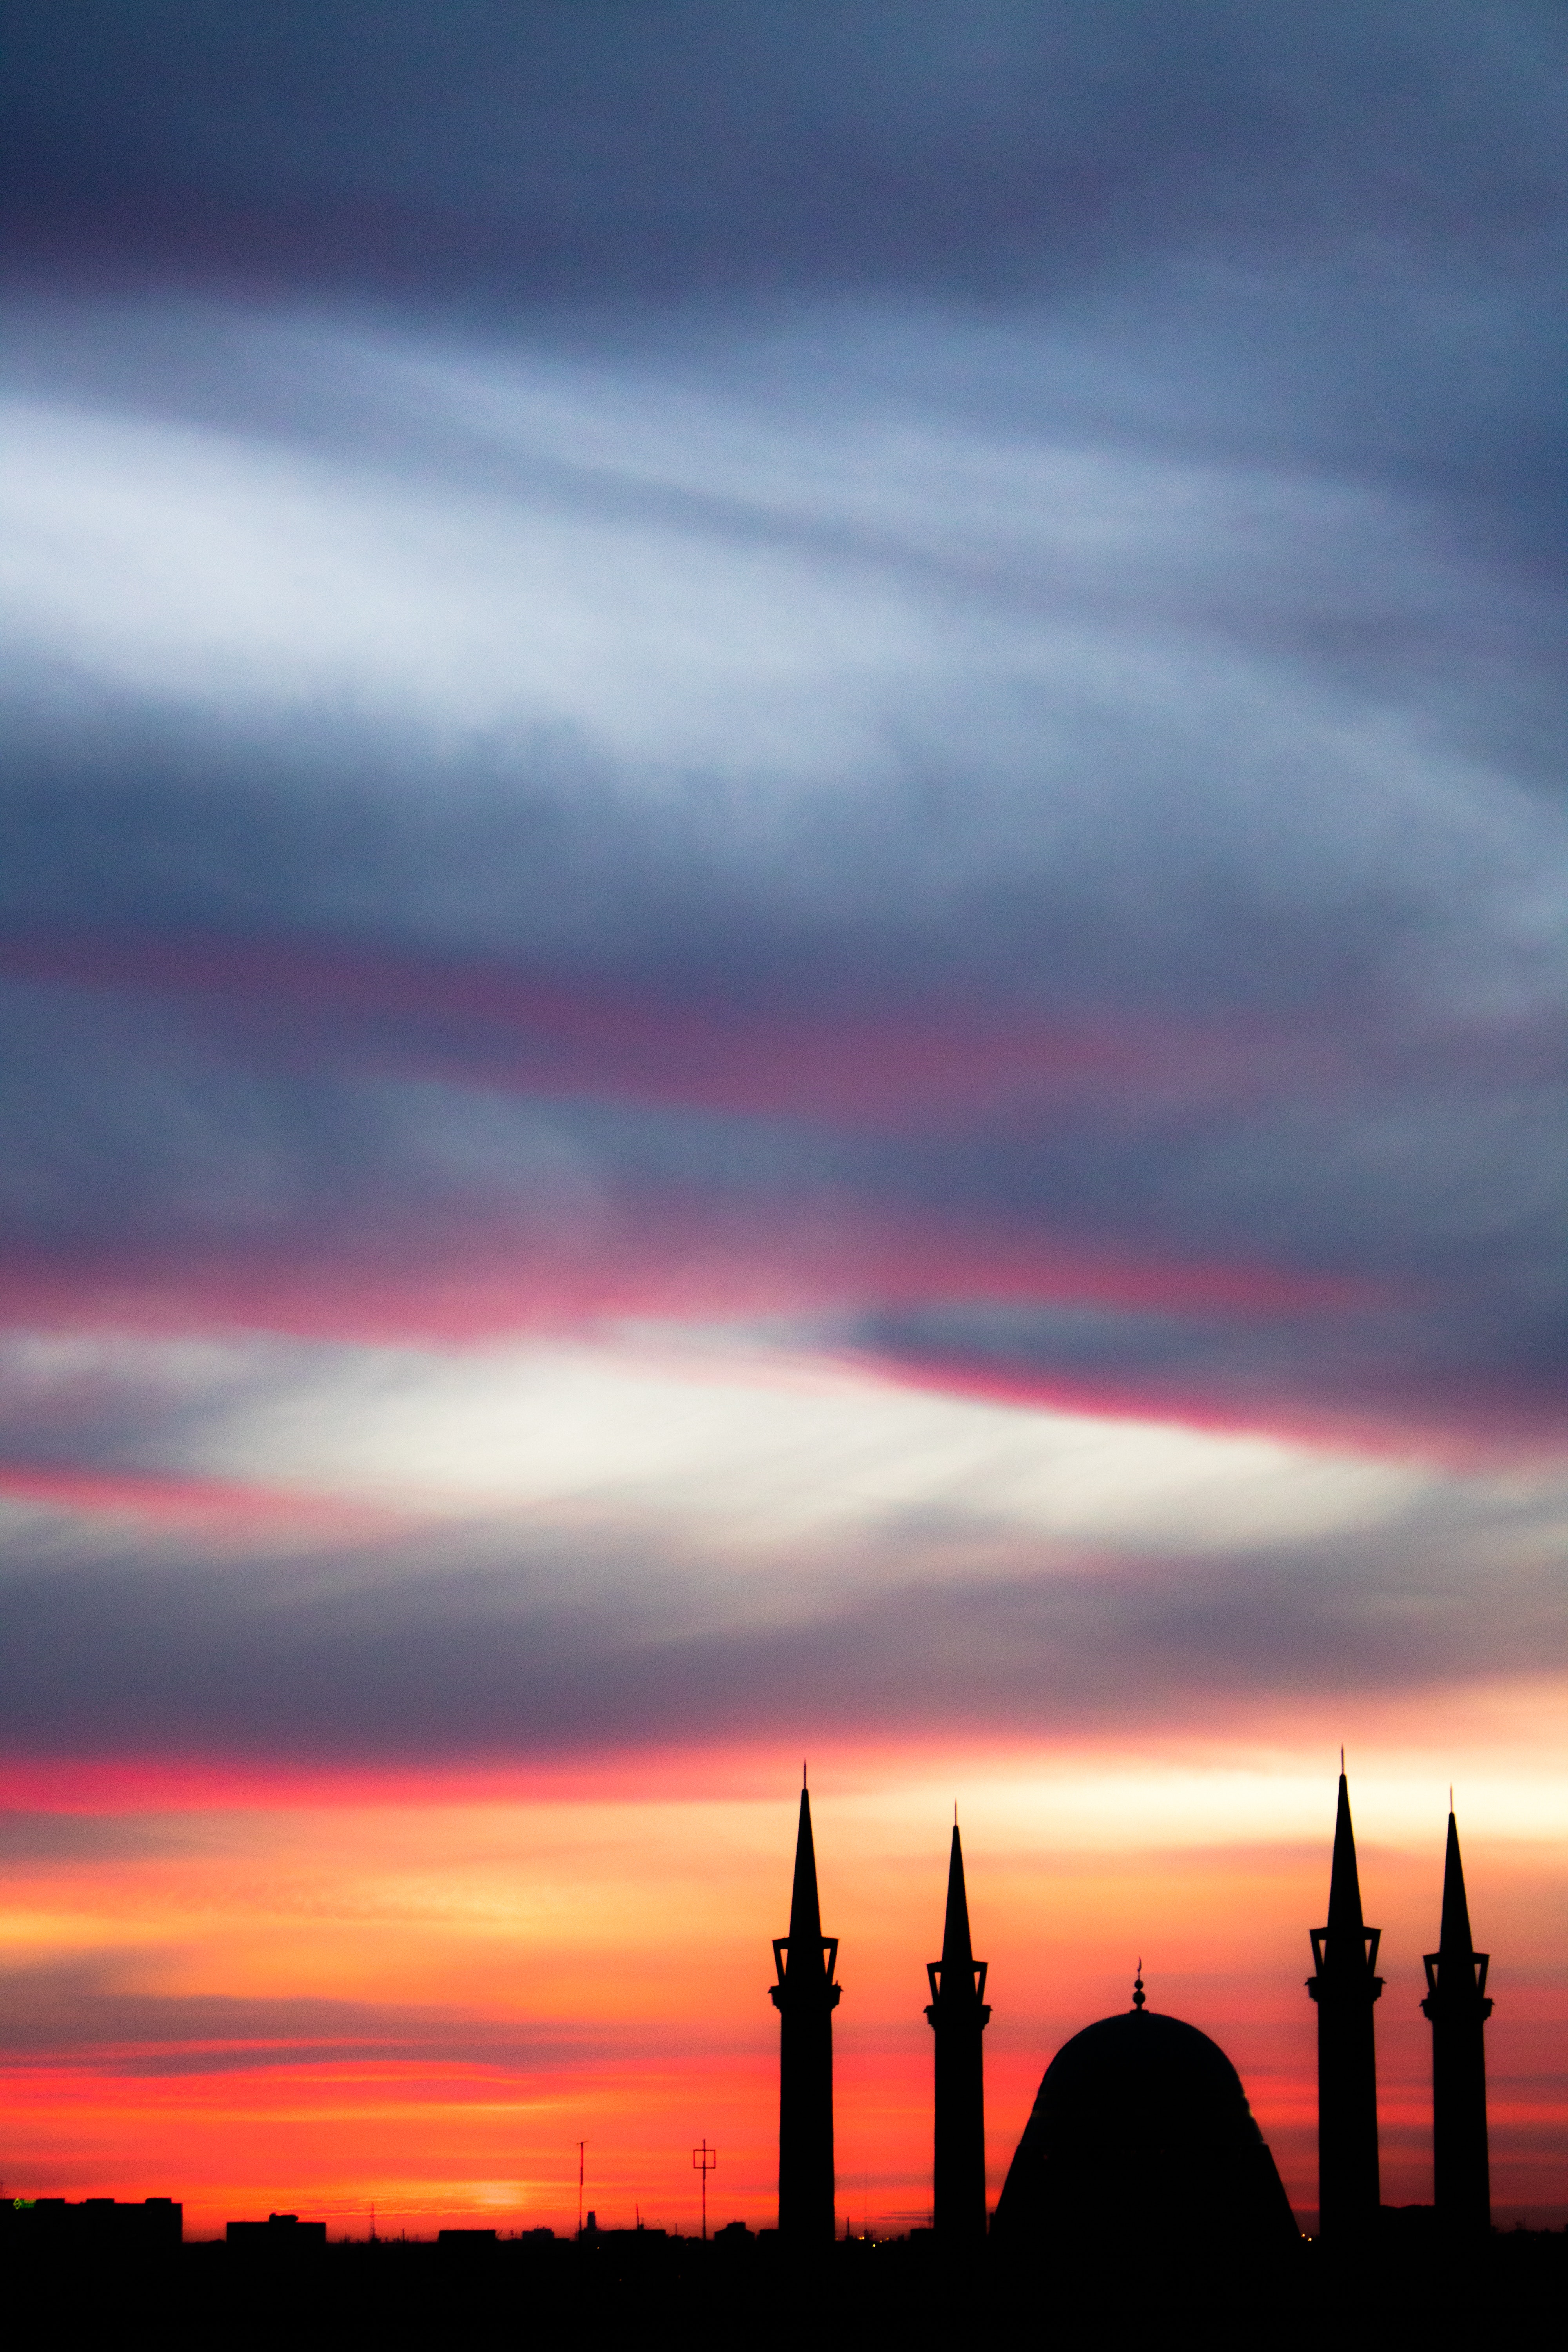 mosque, sky, architecture, cities, sunset QHD